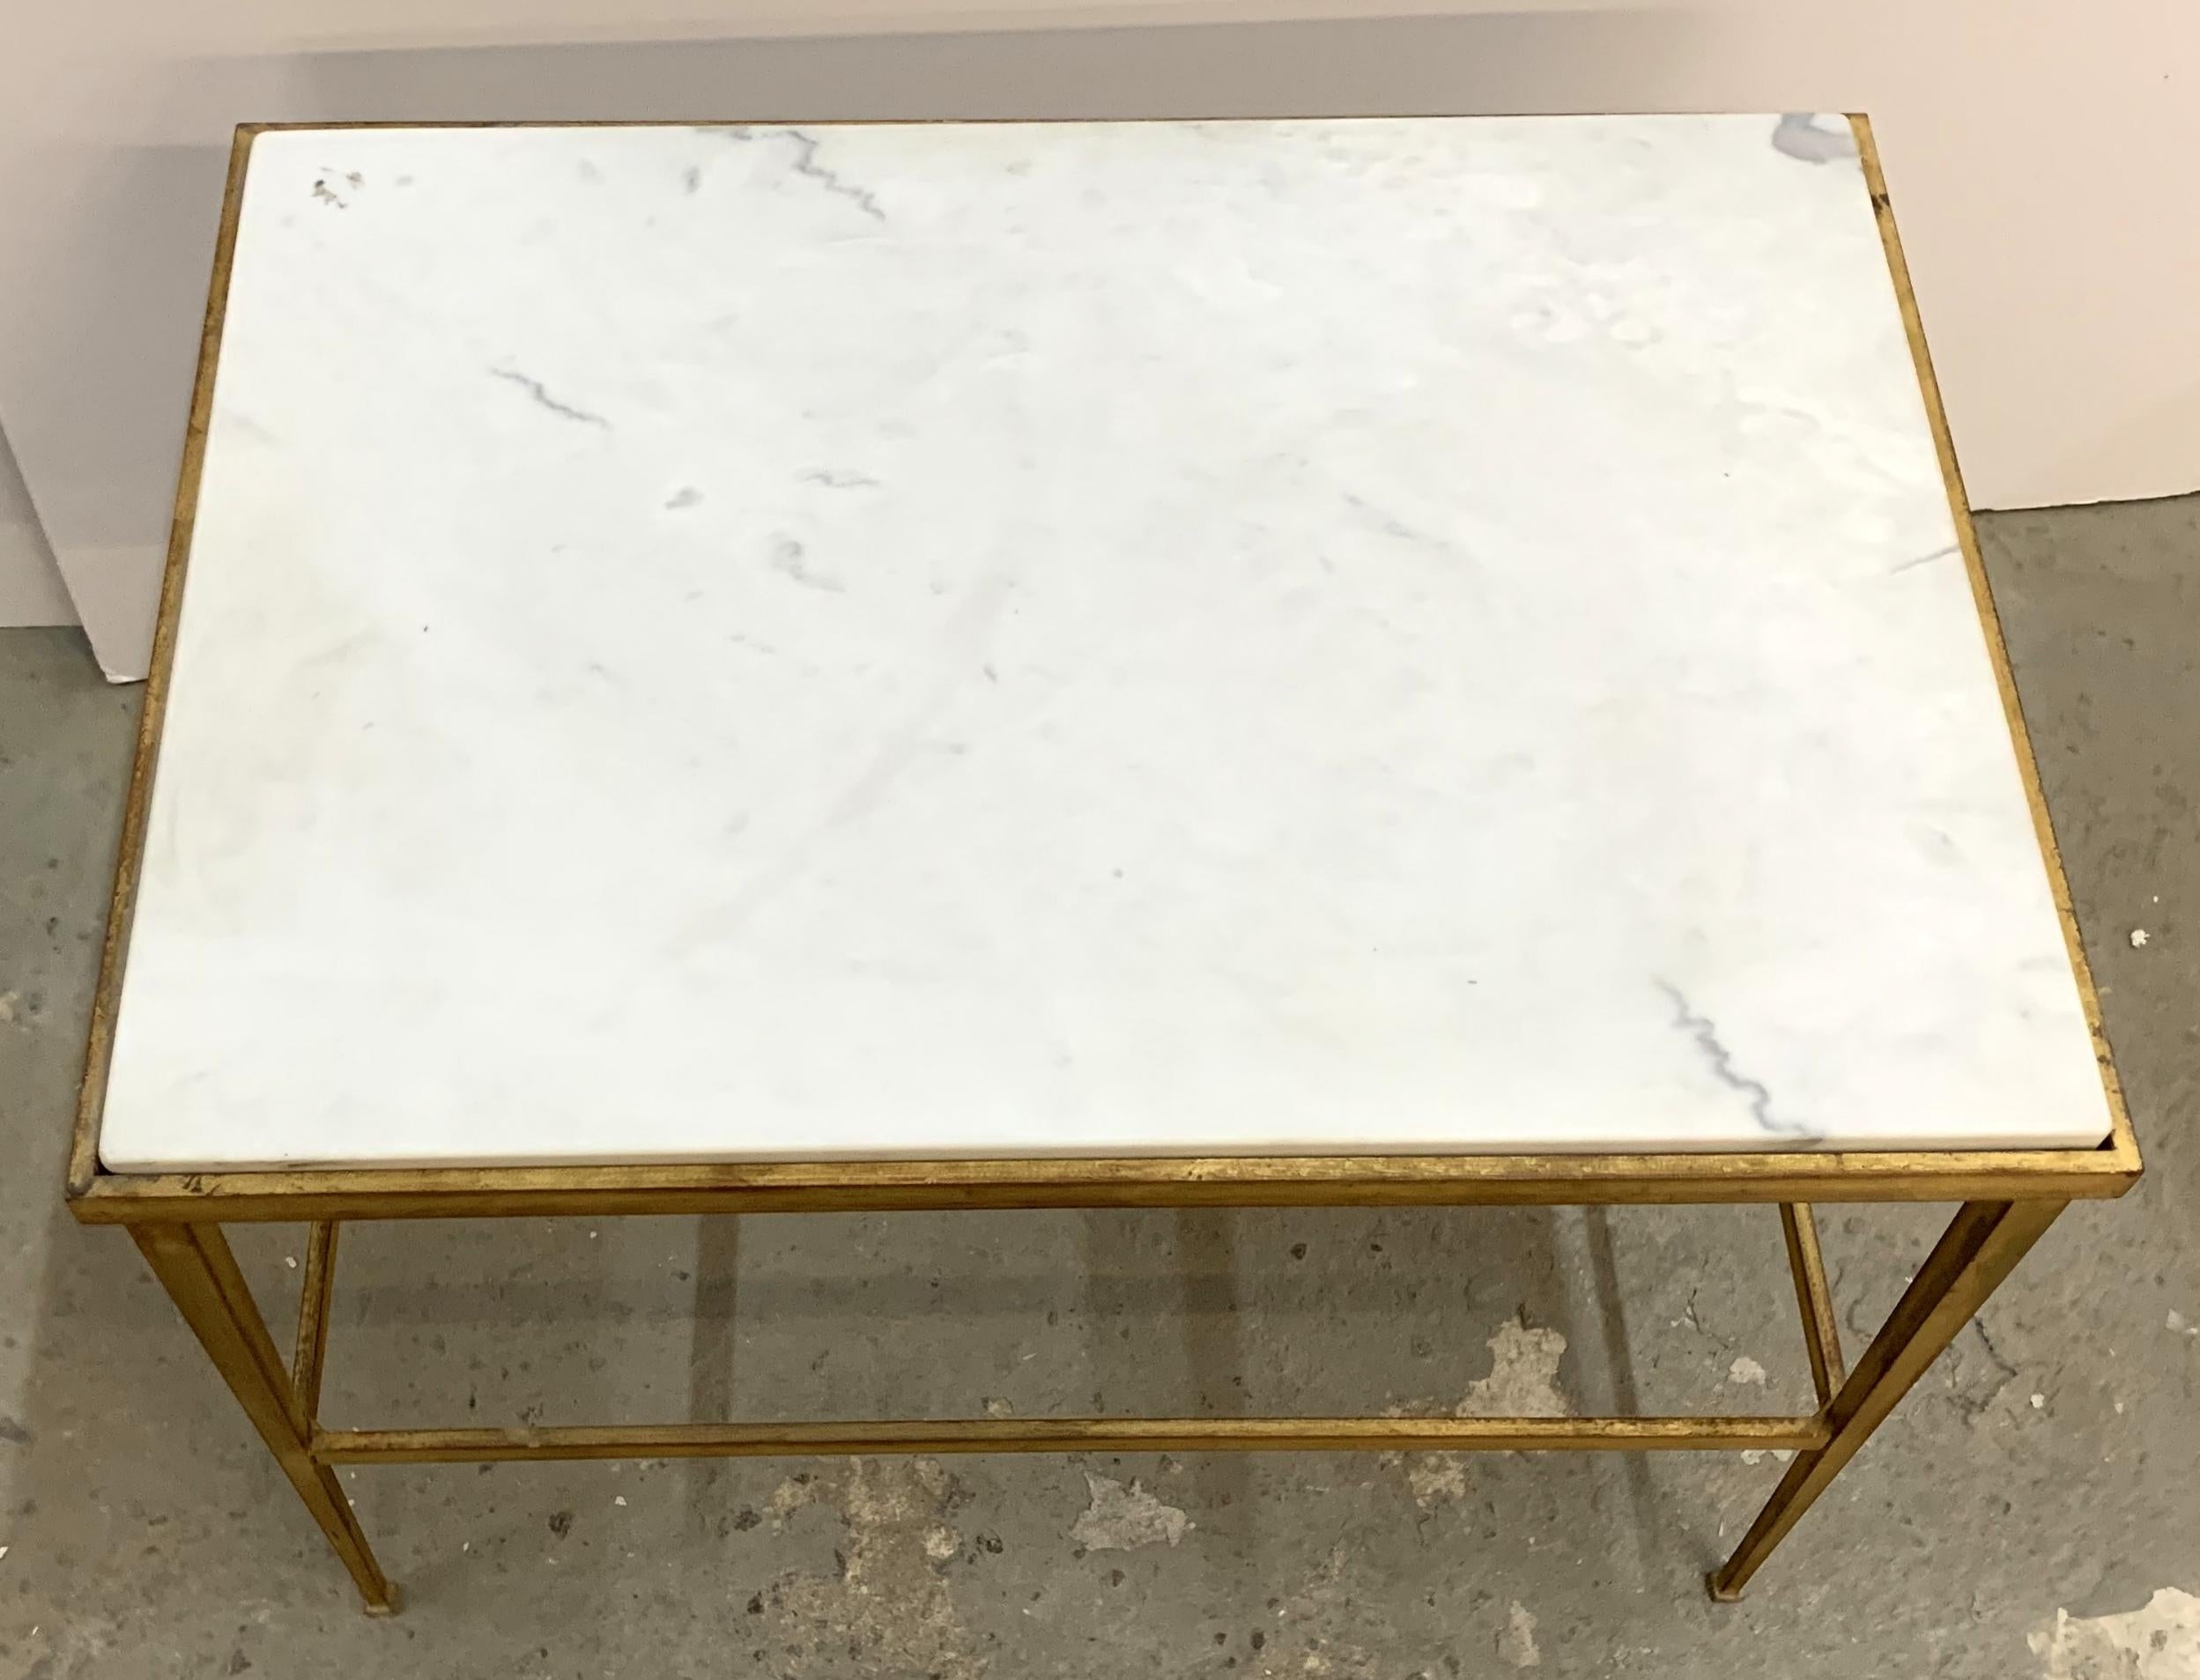 A wonderful Mid-Century Modern French gold gilt iron and marble-top cocktail, coffee or side table 
Purchased from Lorin Marsh.